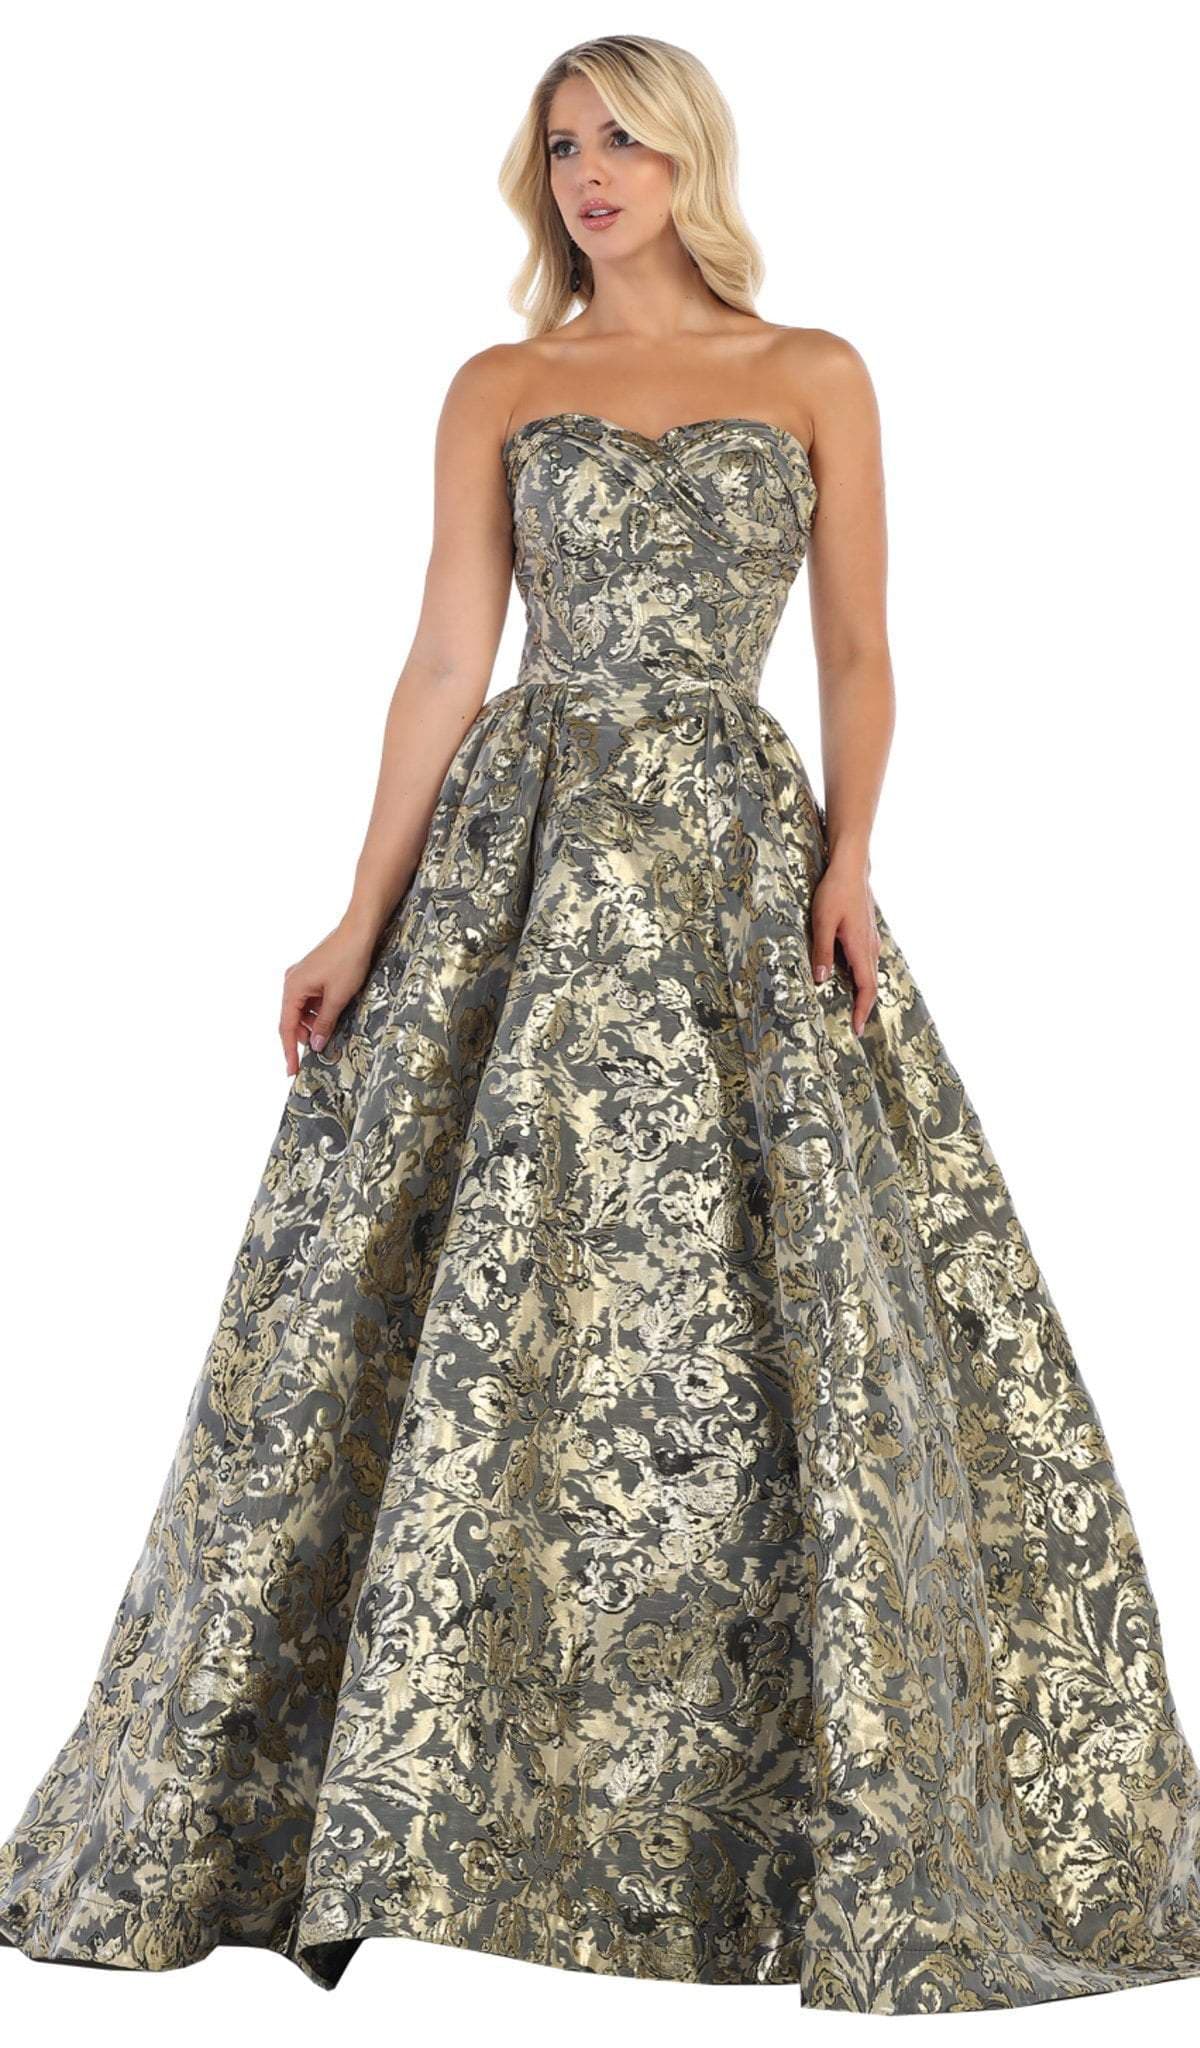 May Queen - RQ7653 Two Tone Strapless Sweetheart Ballgown Special Occasion Dress 4 / Black/Gold